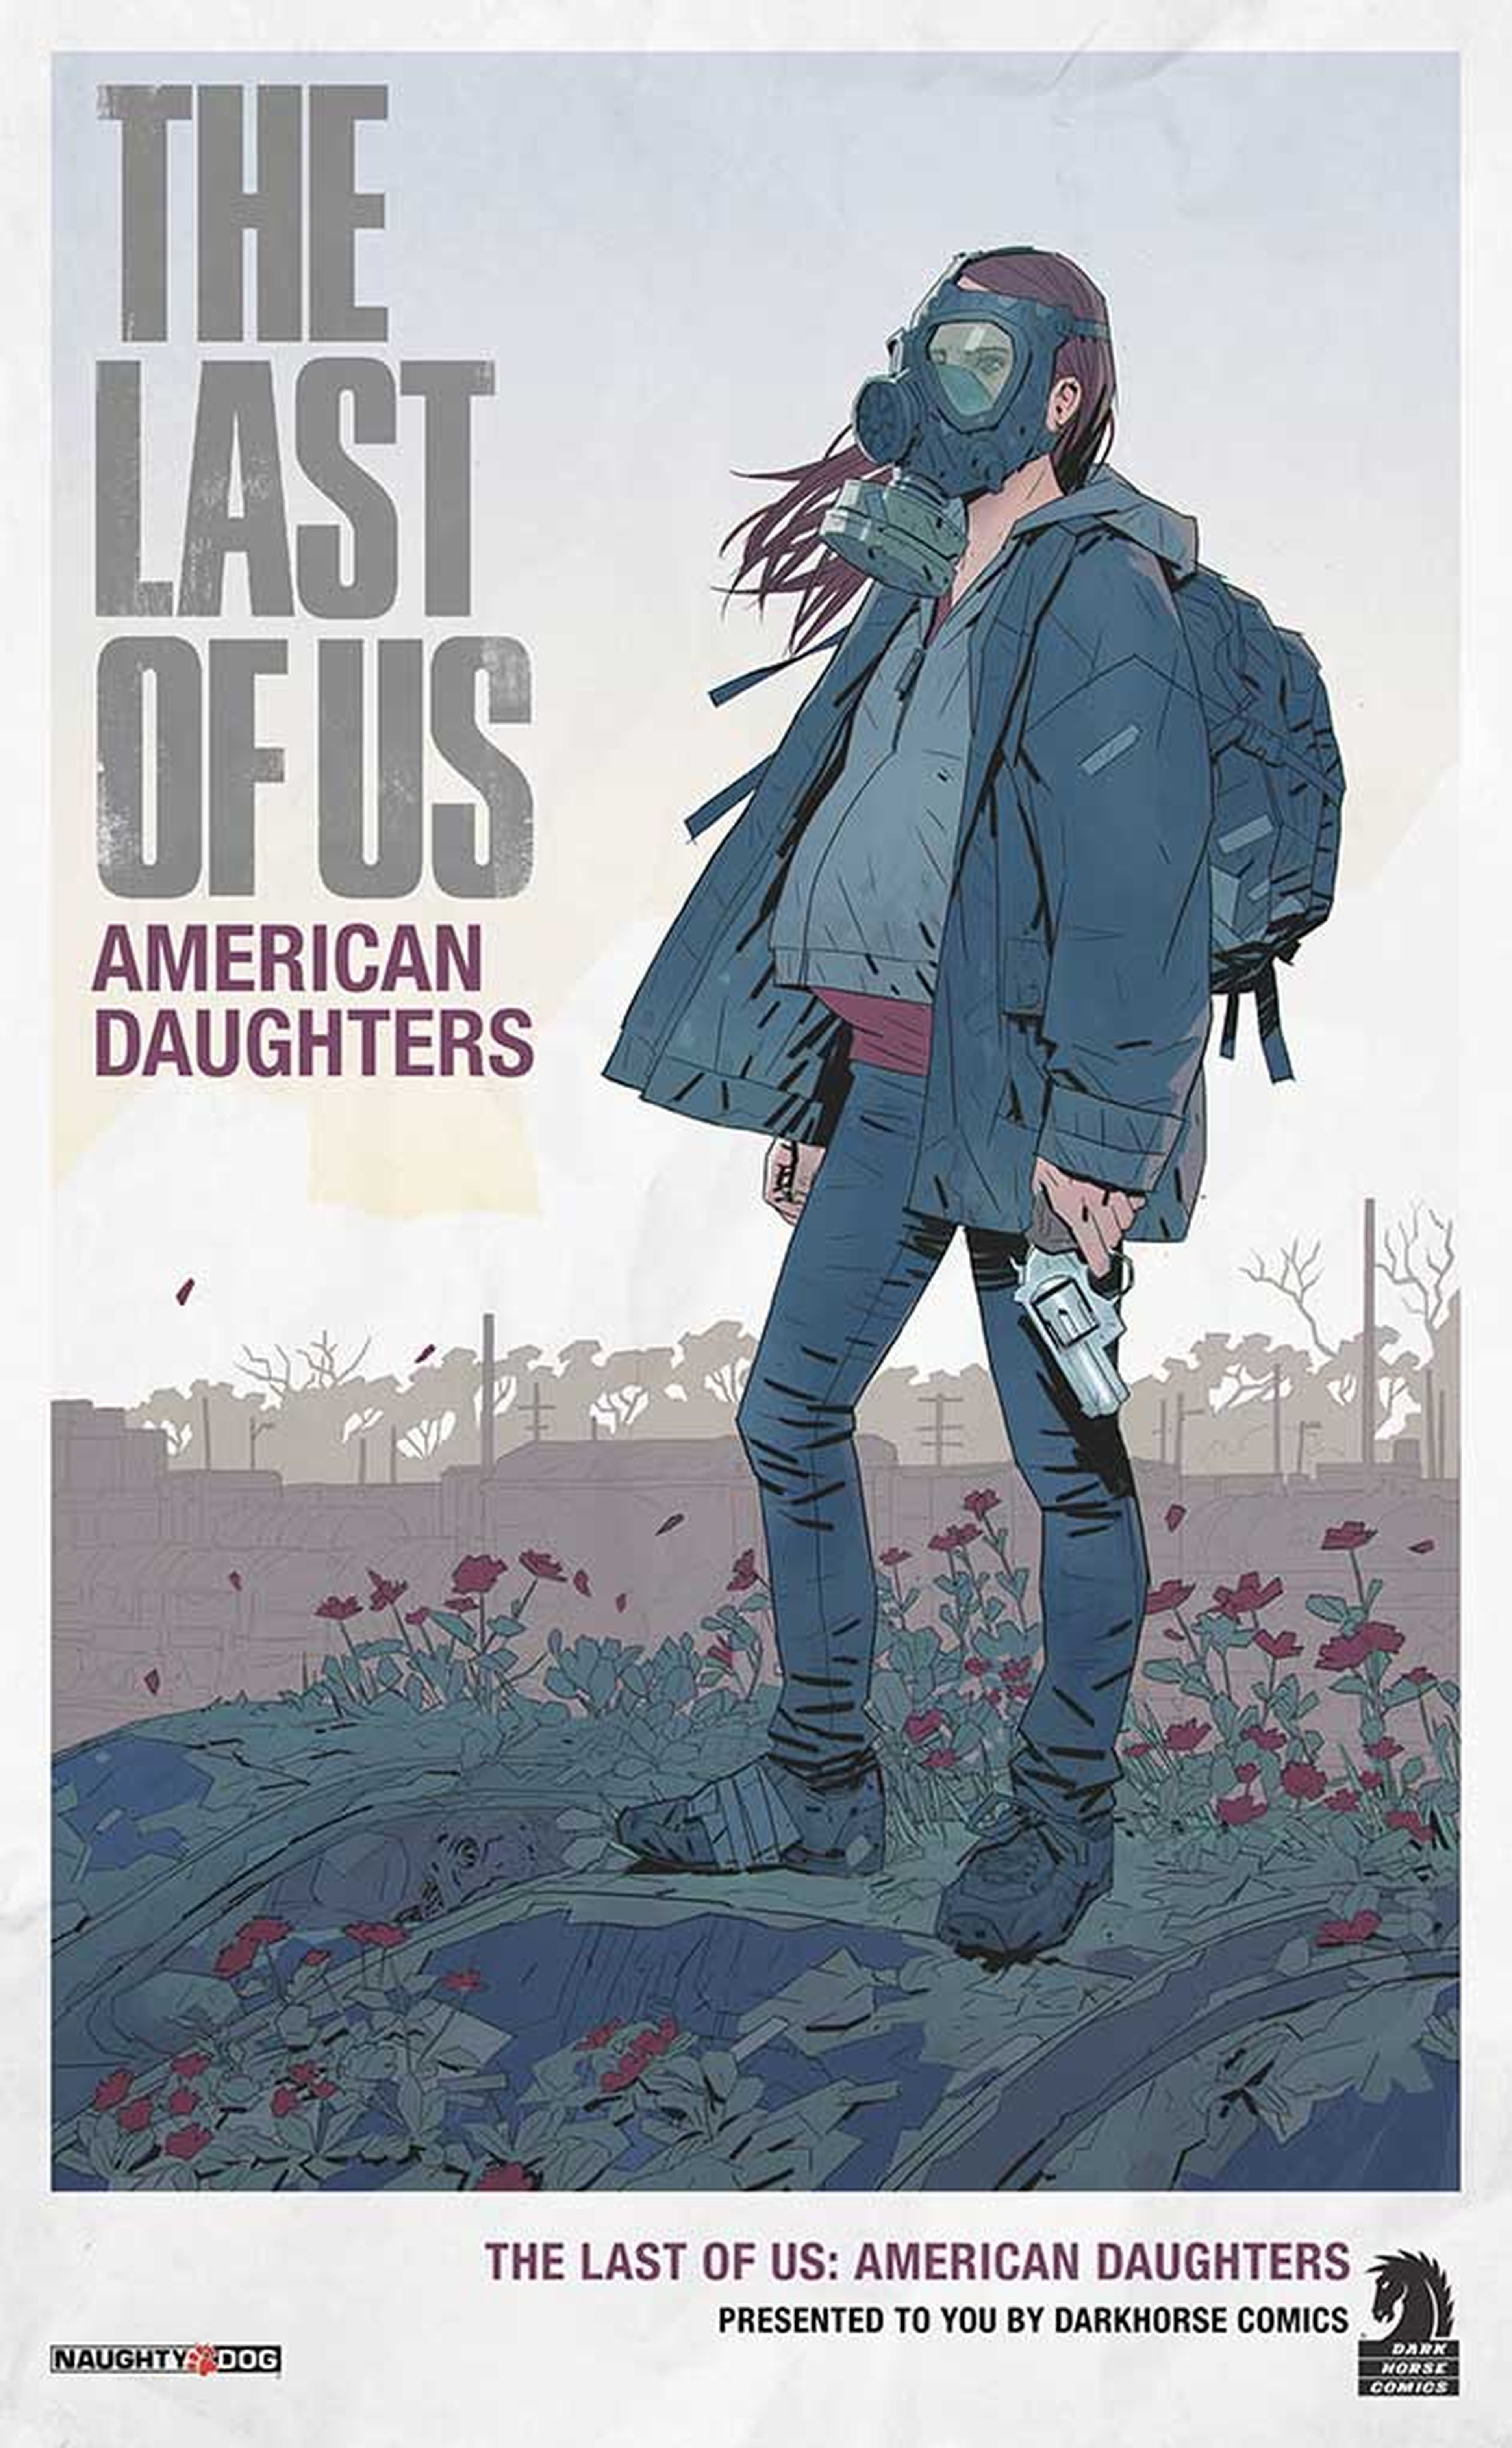 The Last of Us - American Daughter